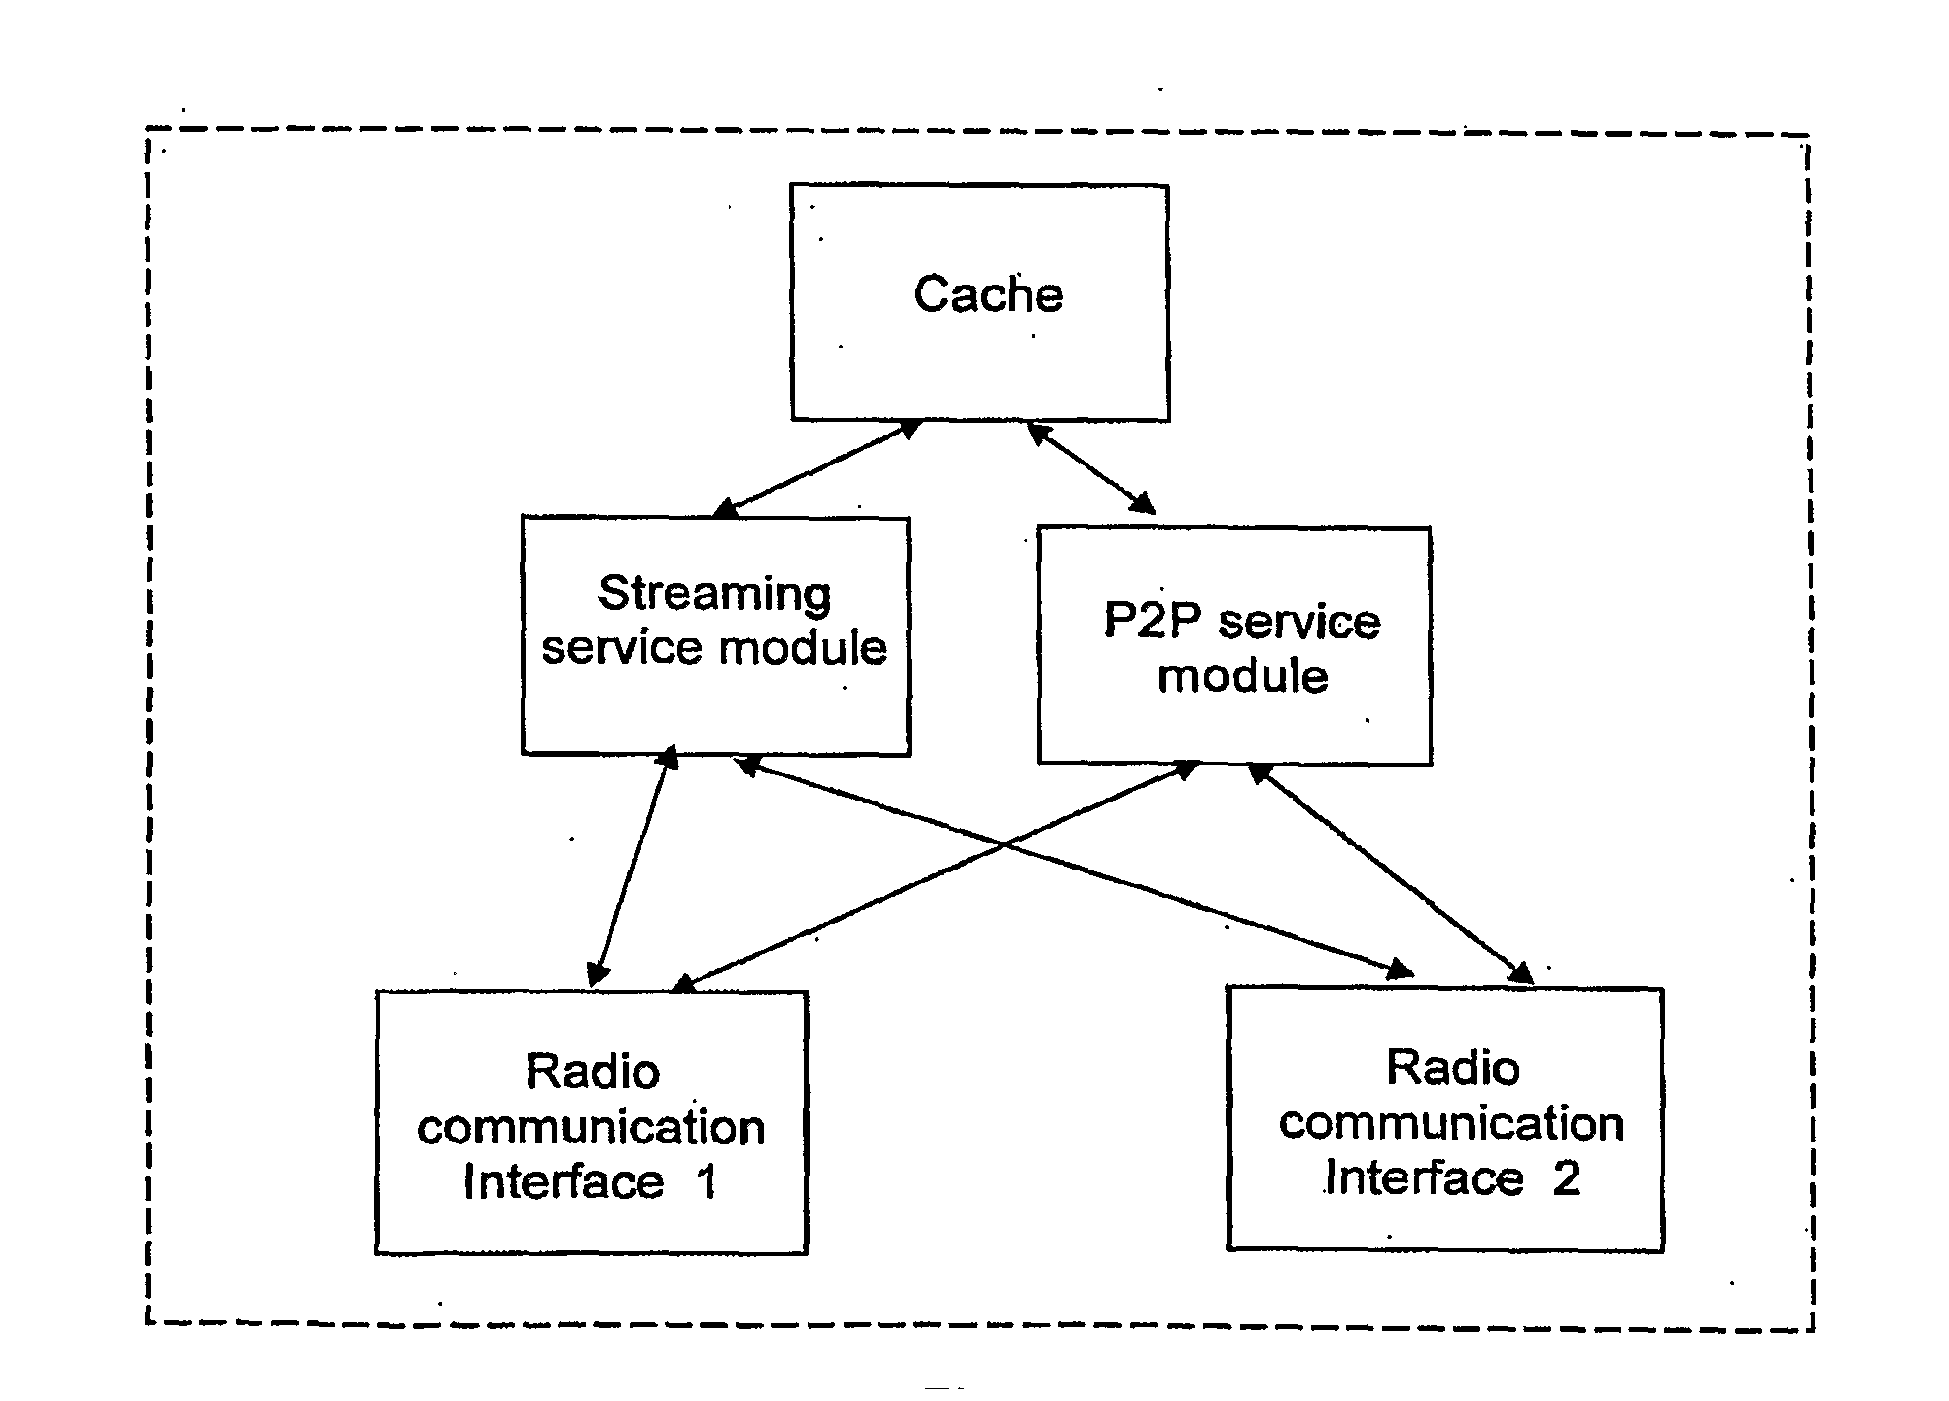 Unified peer-to-peer and cache system for content services in wireless mesh networks